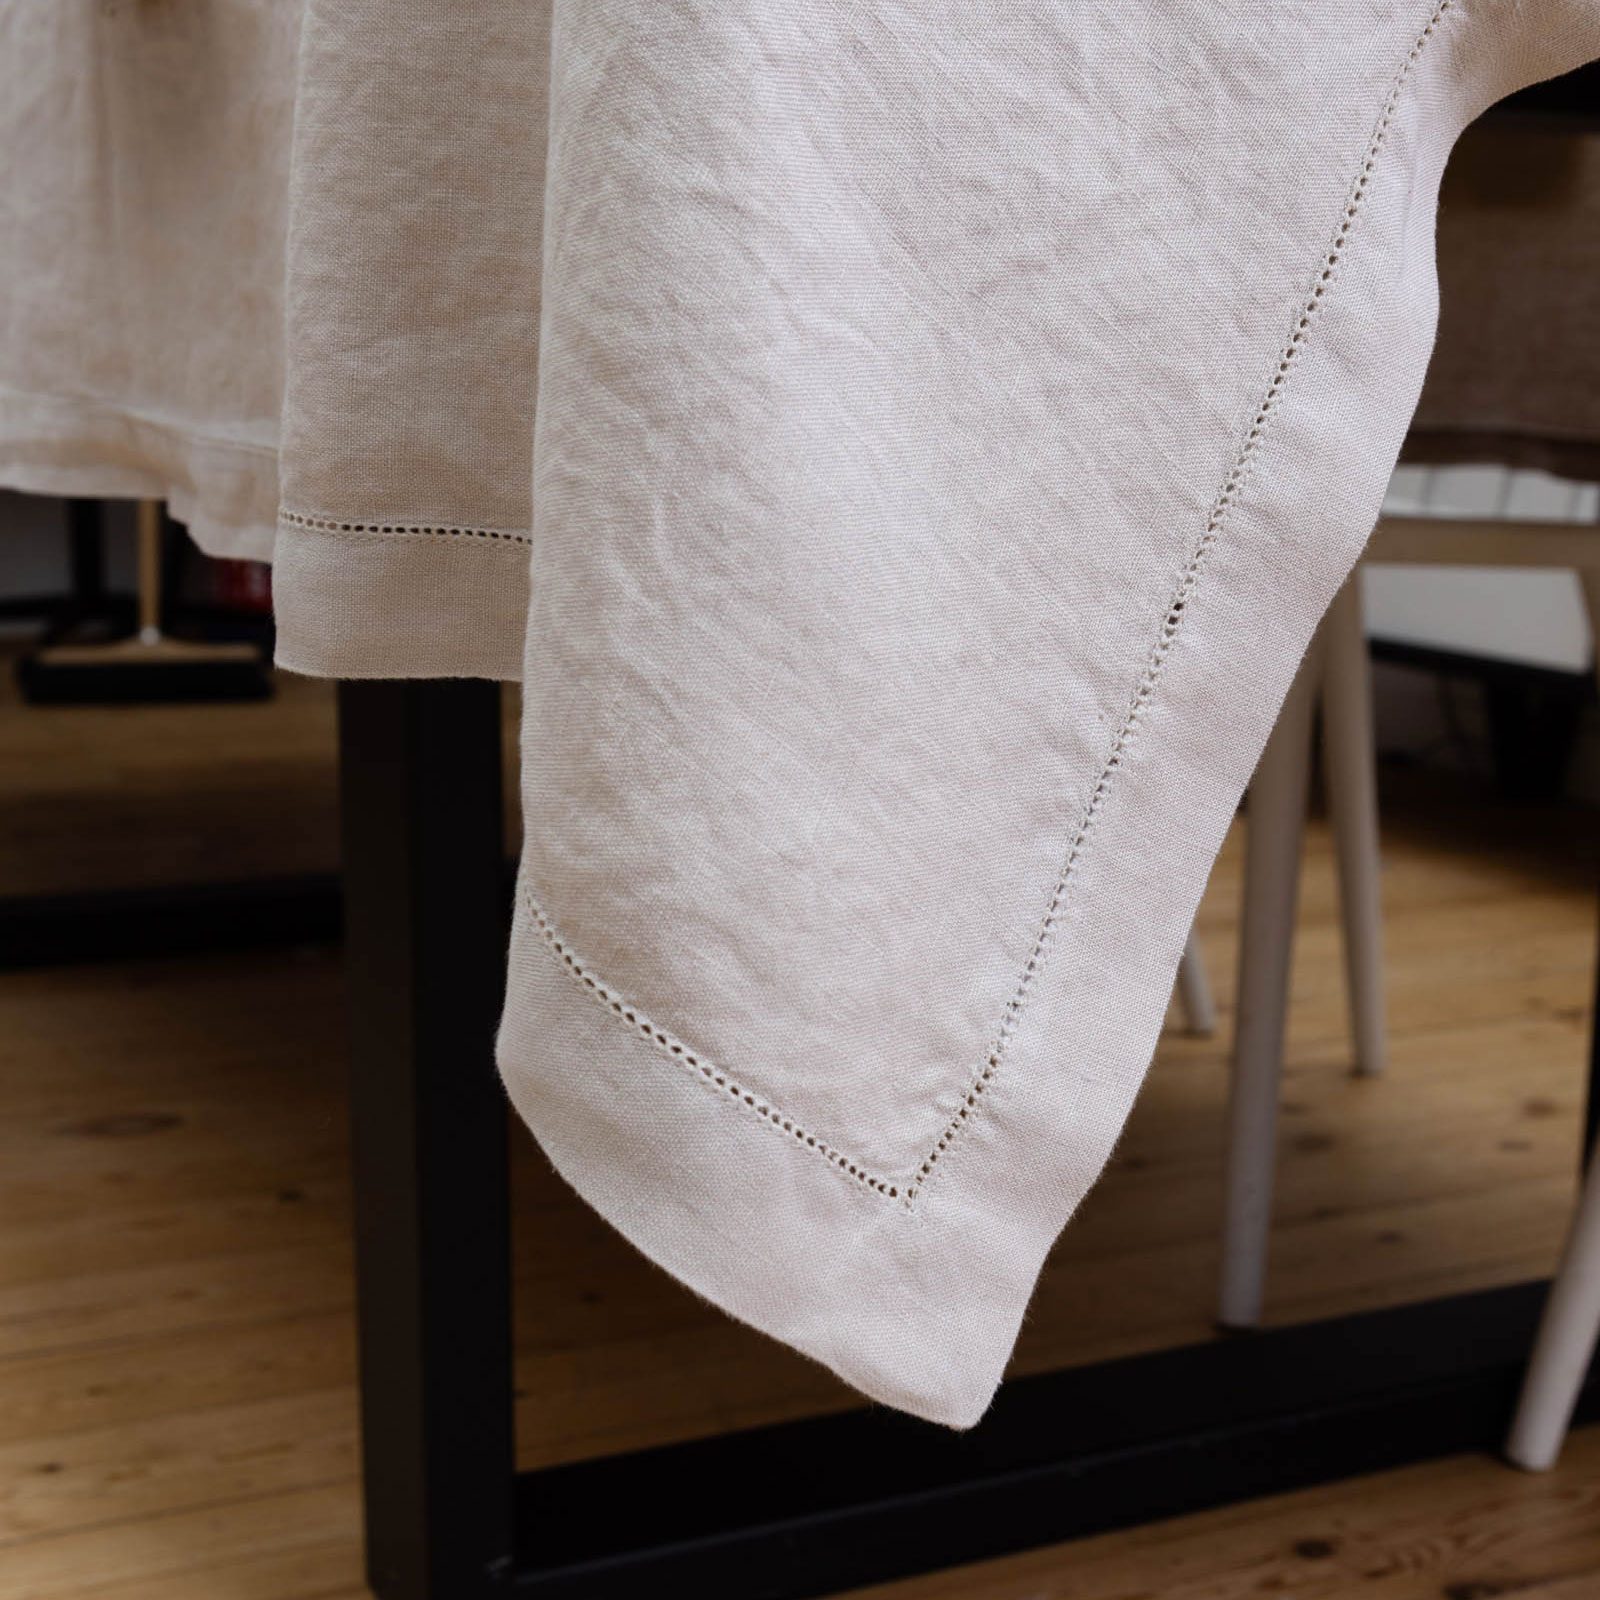 stone-washed-linen-hem-stitch-table-cloth-natural-4